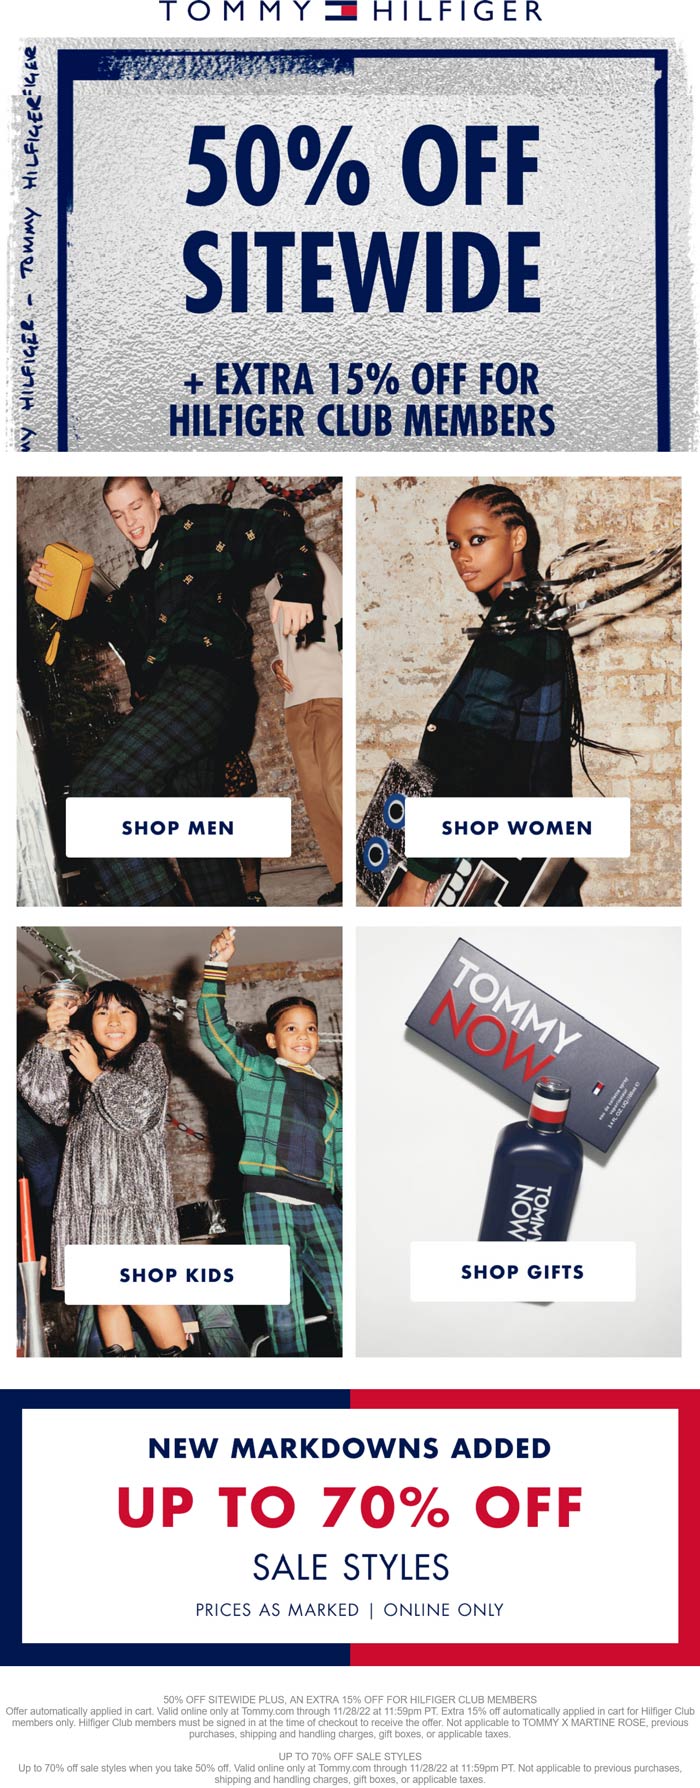 Tommy Hilfiger stores Coupon  50-65% off everything online today at Tommy Hilfiger #tommyhilfiger 